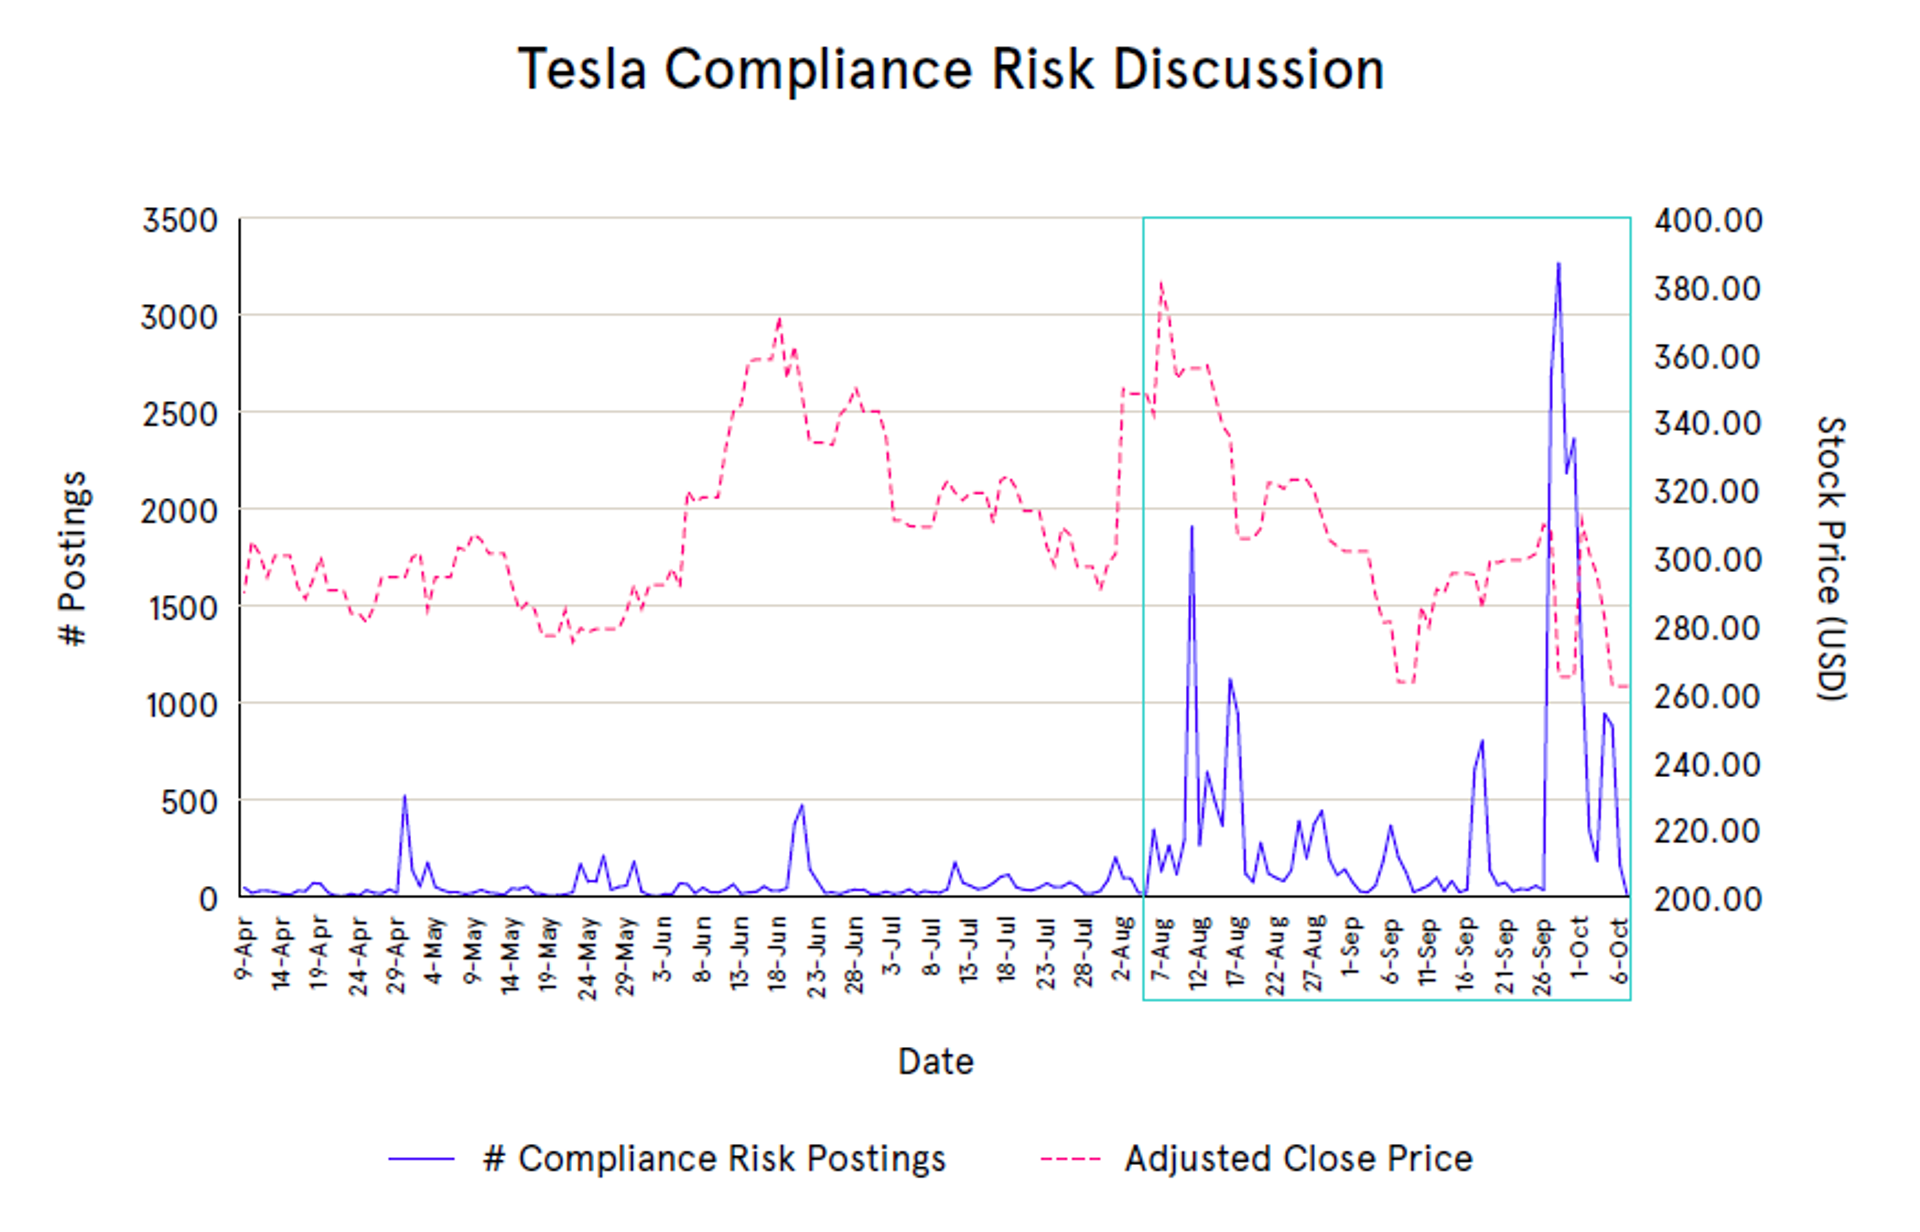 A chart showing the volume of discussion around Tesla's risk compliance